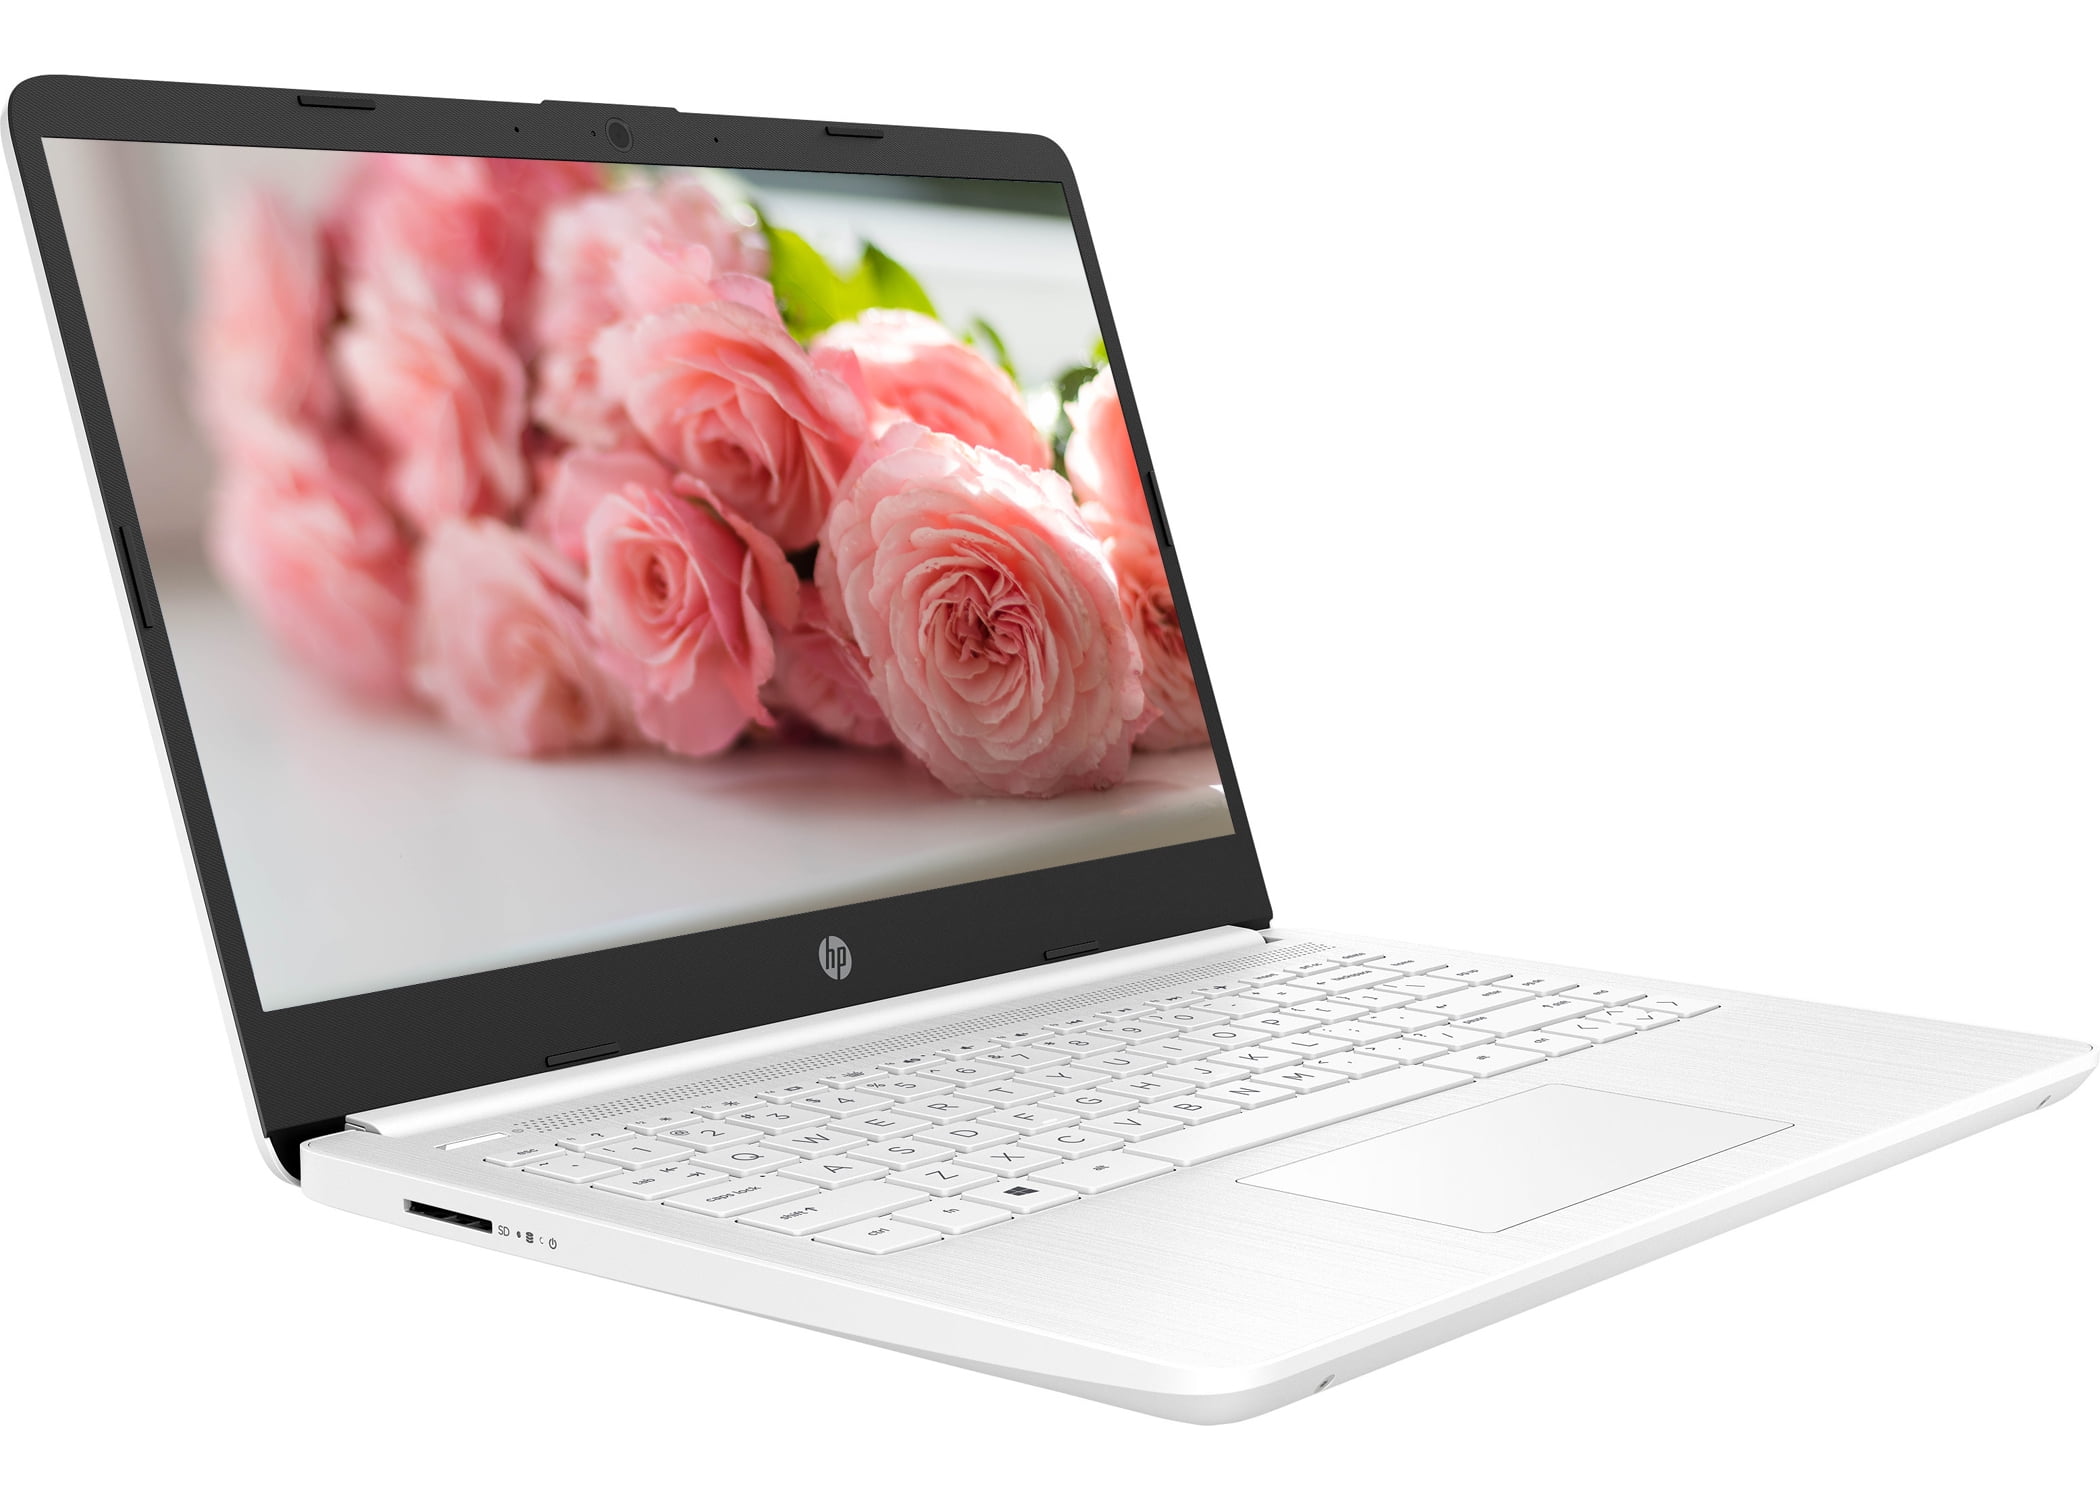 HP Laptop 14-dq0052dx - Intel Celeron N4120 / 1.1 GHz - Win 10 Home in S  mode - UHD Graphics 600 - 64 GB eMMC - 14